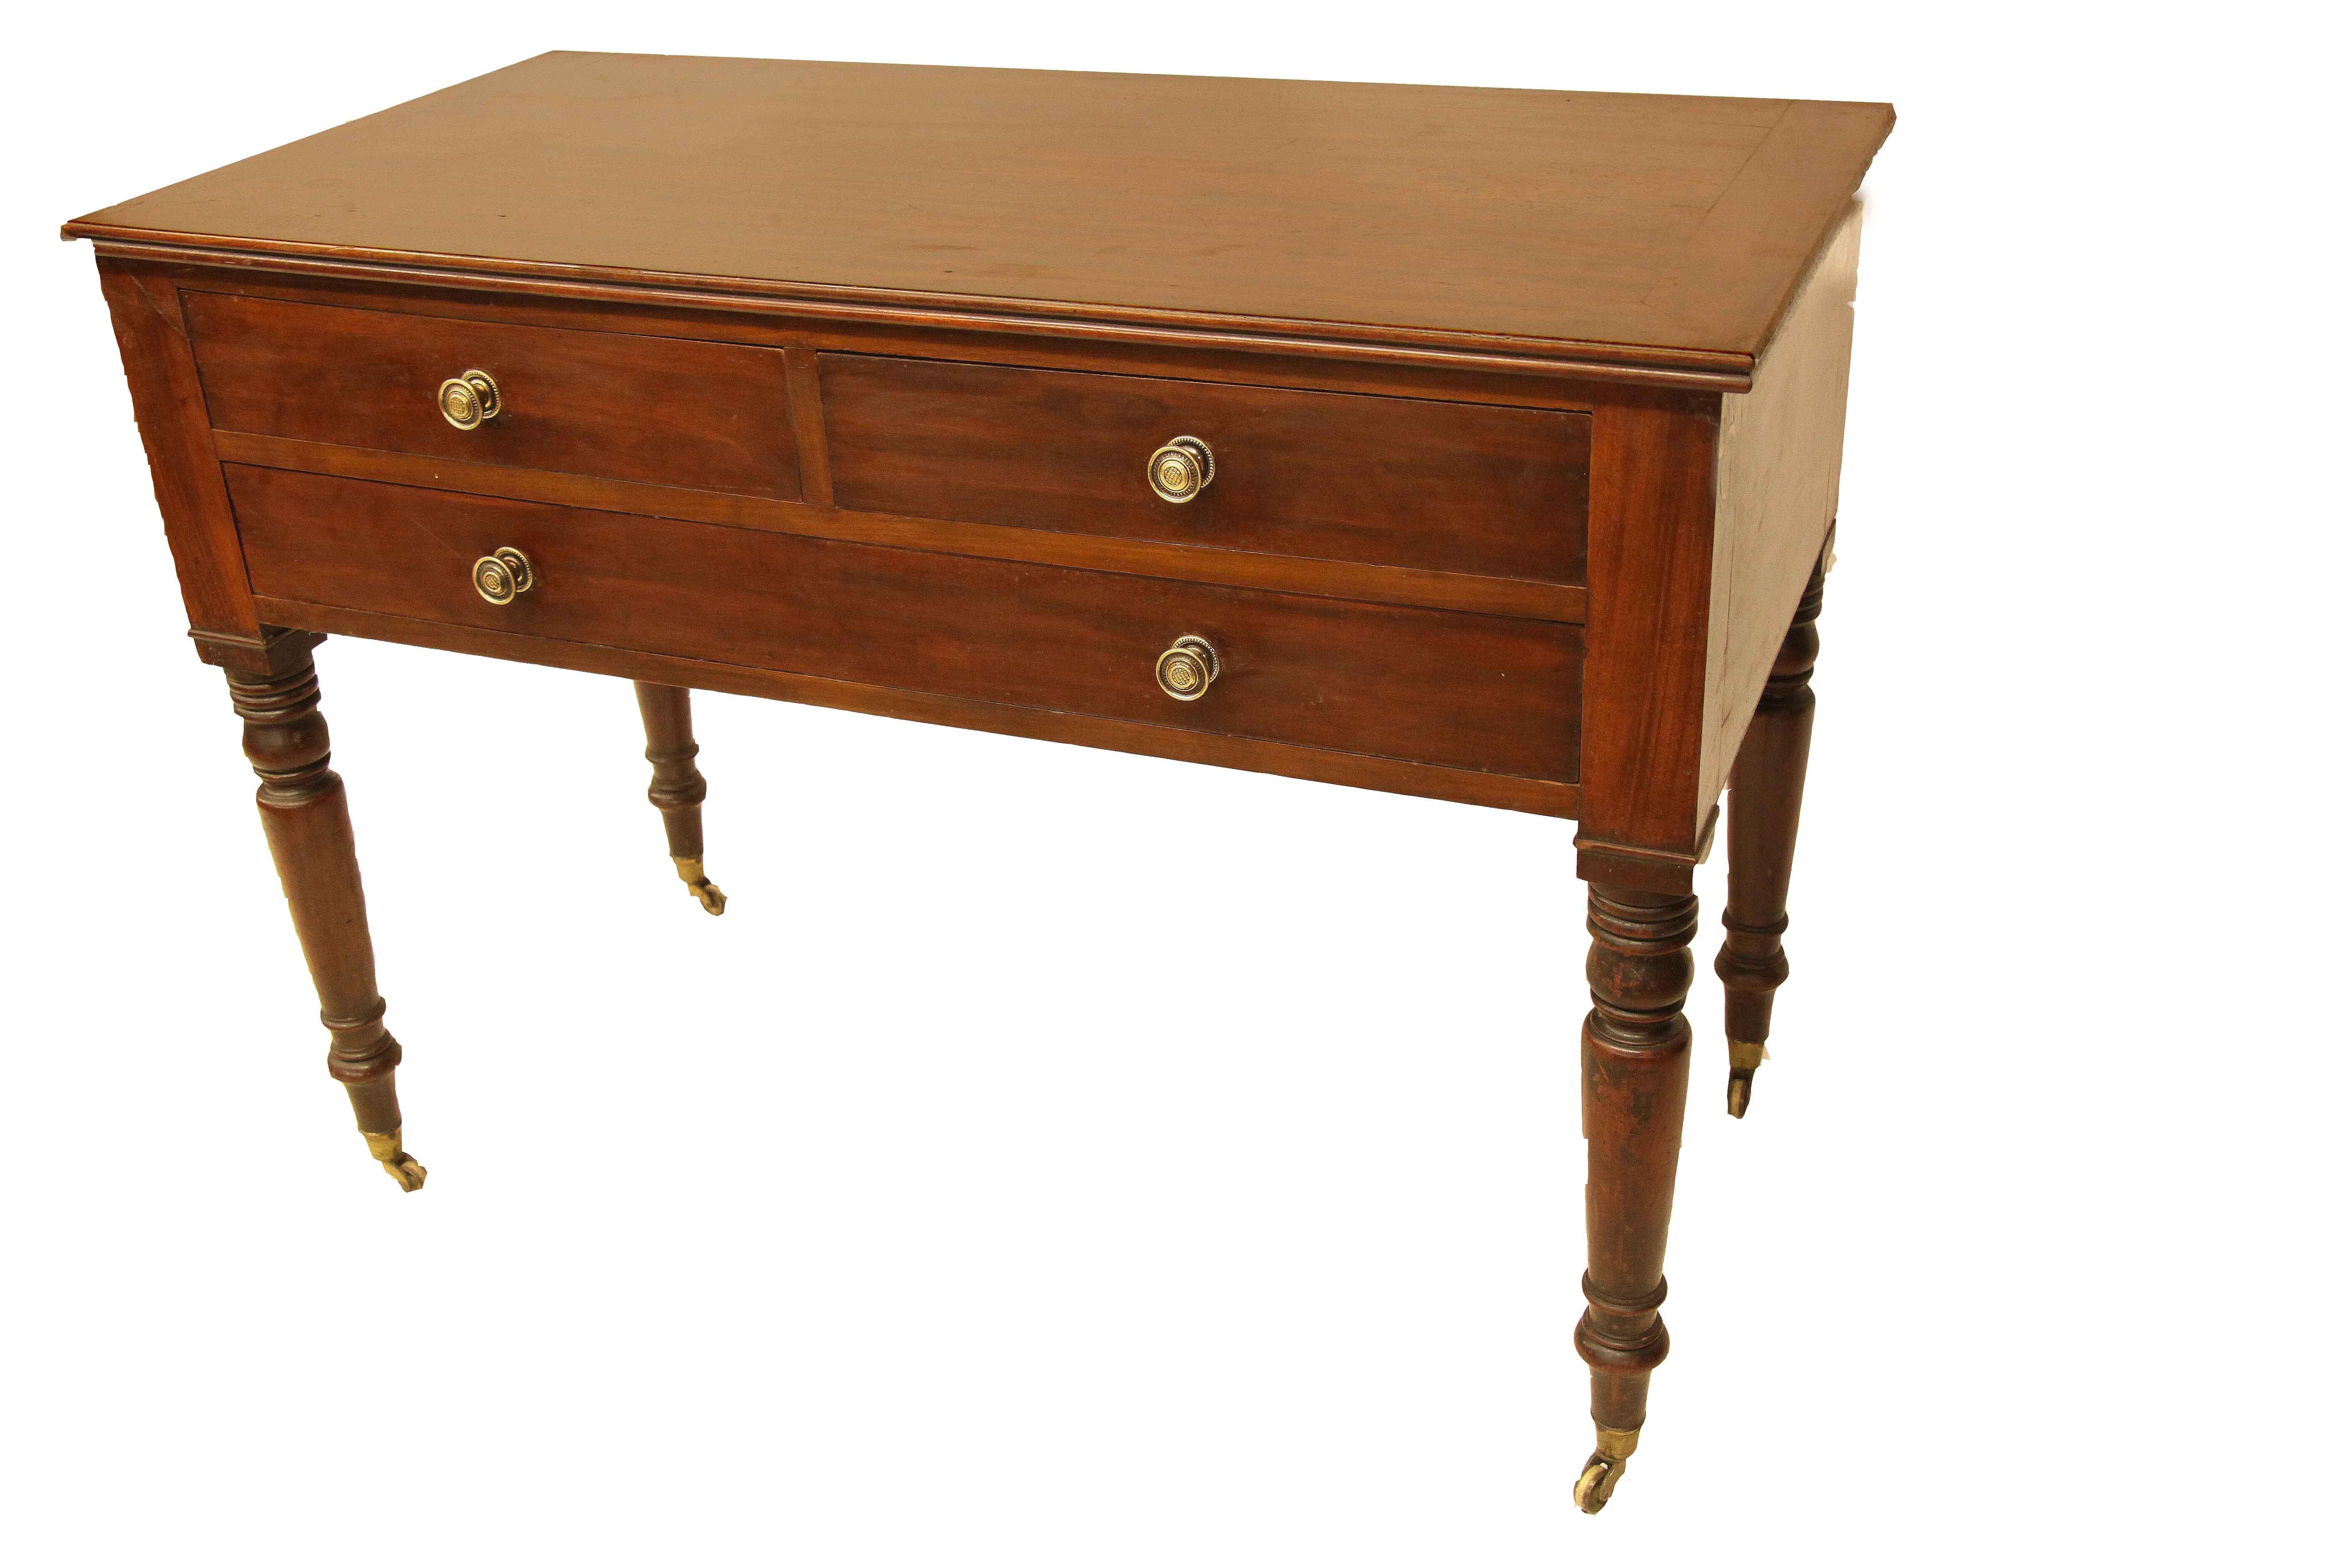 Mid-19th Century English Mahogany Turned Leg Serving Table For Sale